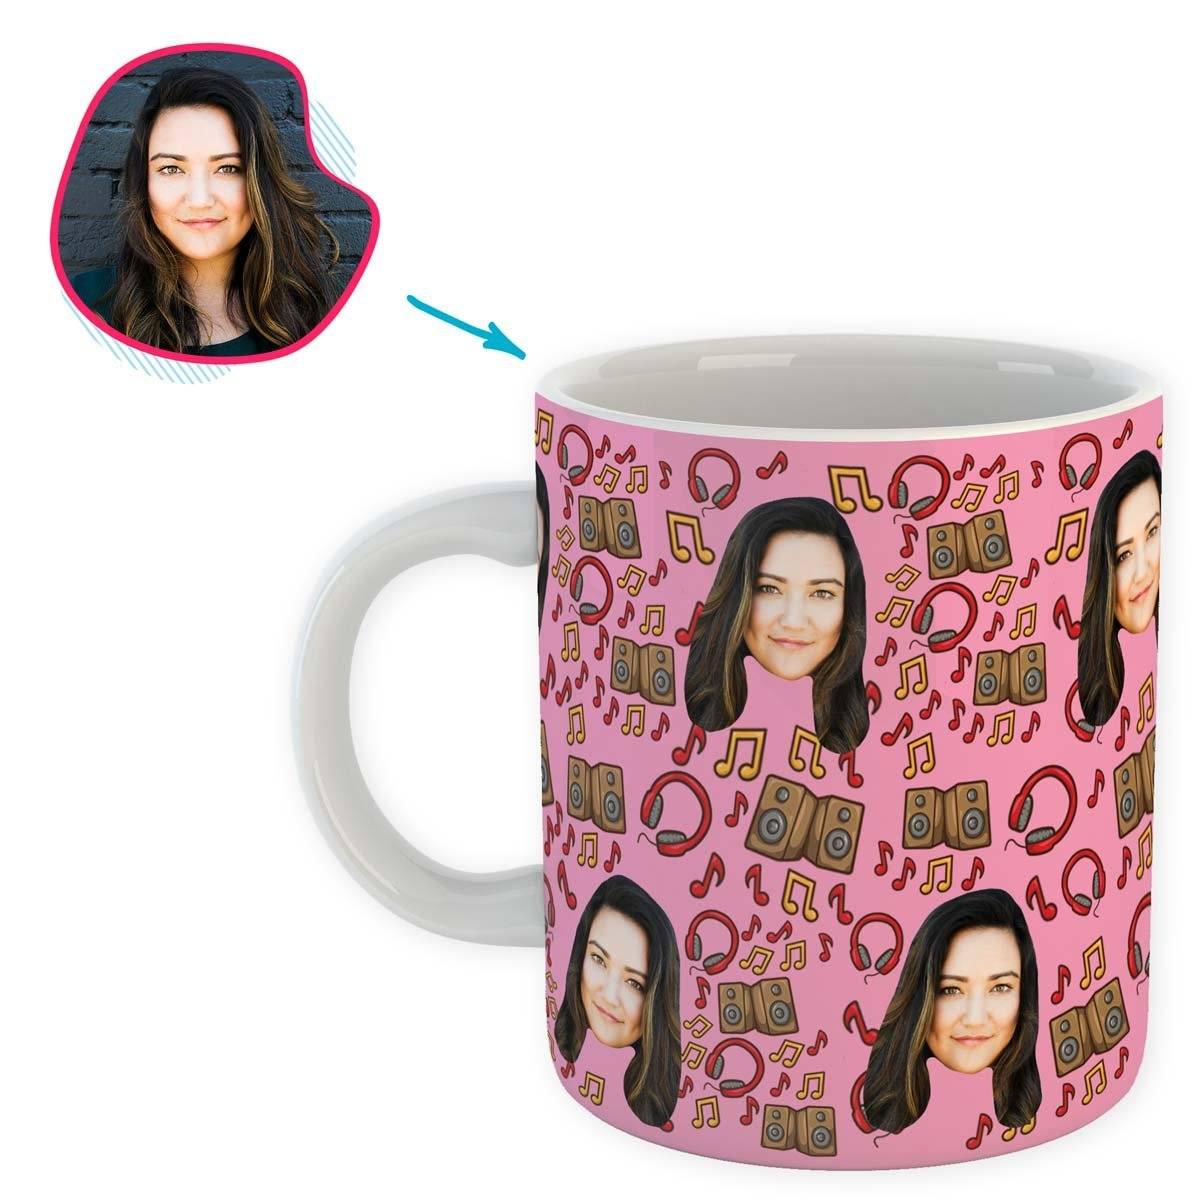 pink Music mug personalized with photo of face printed on it